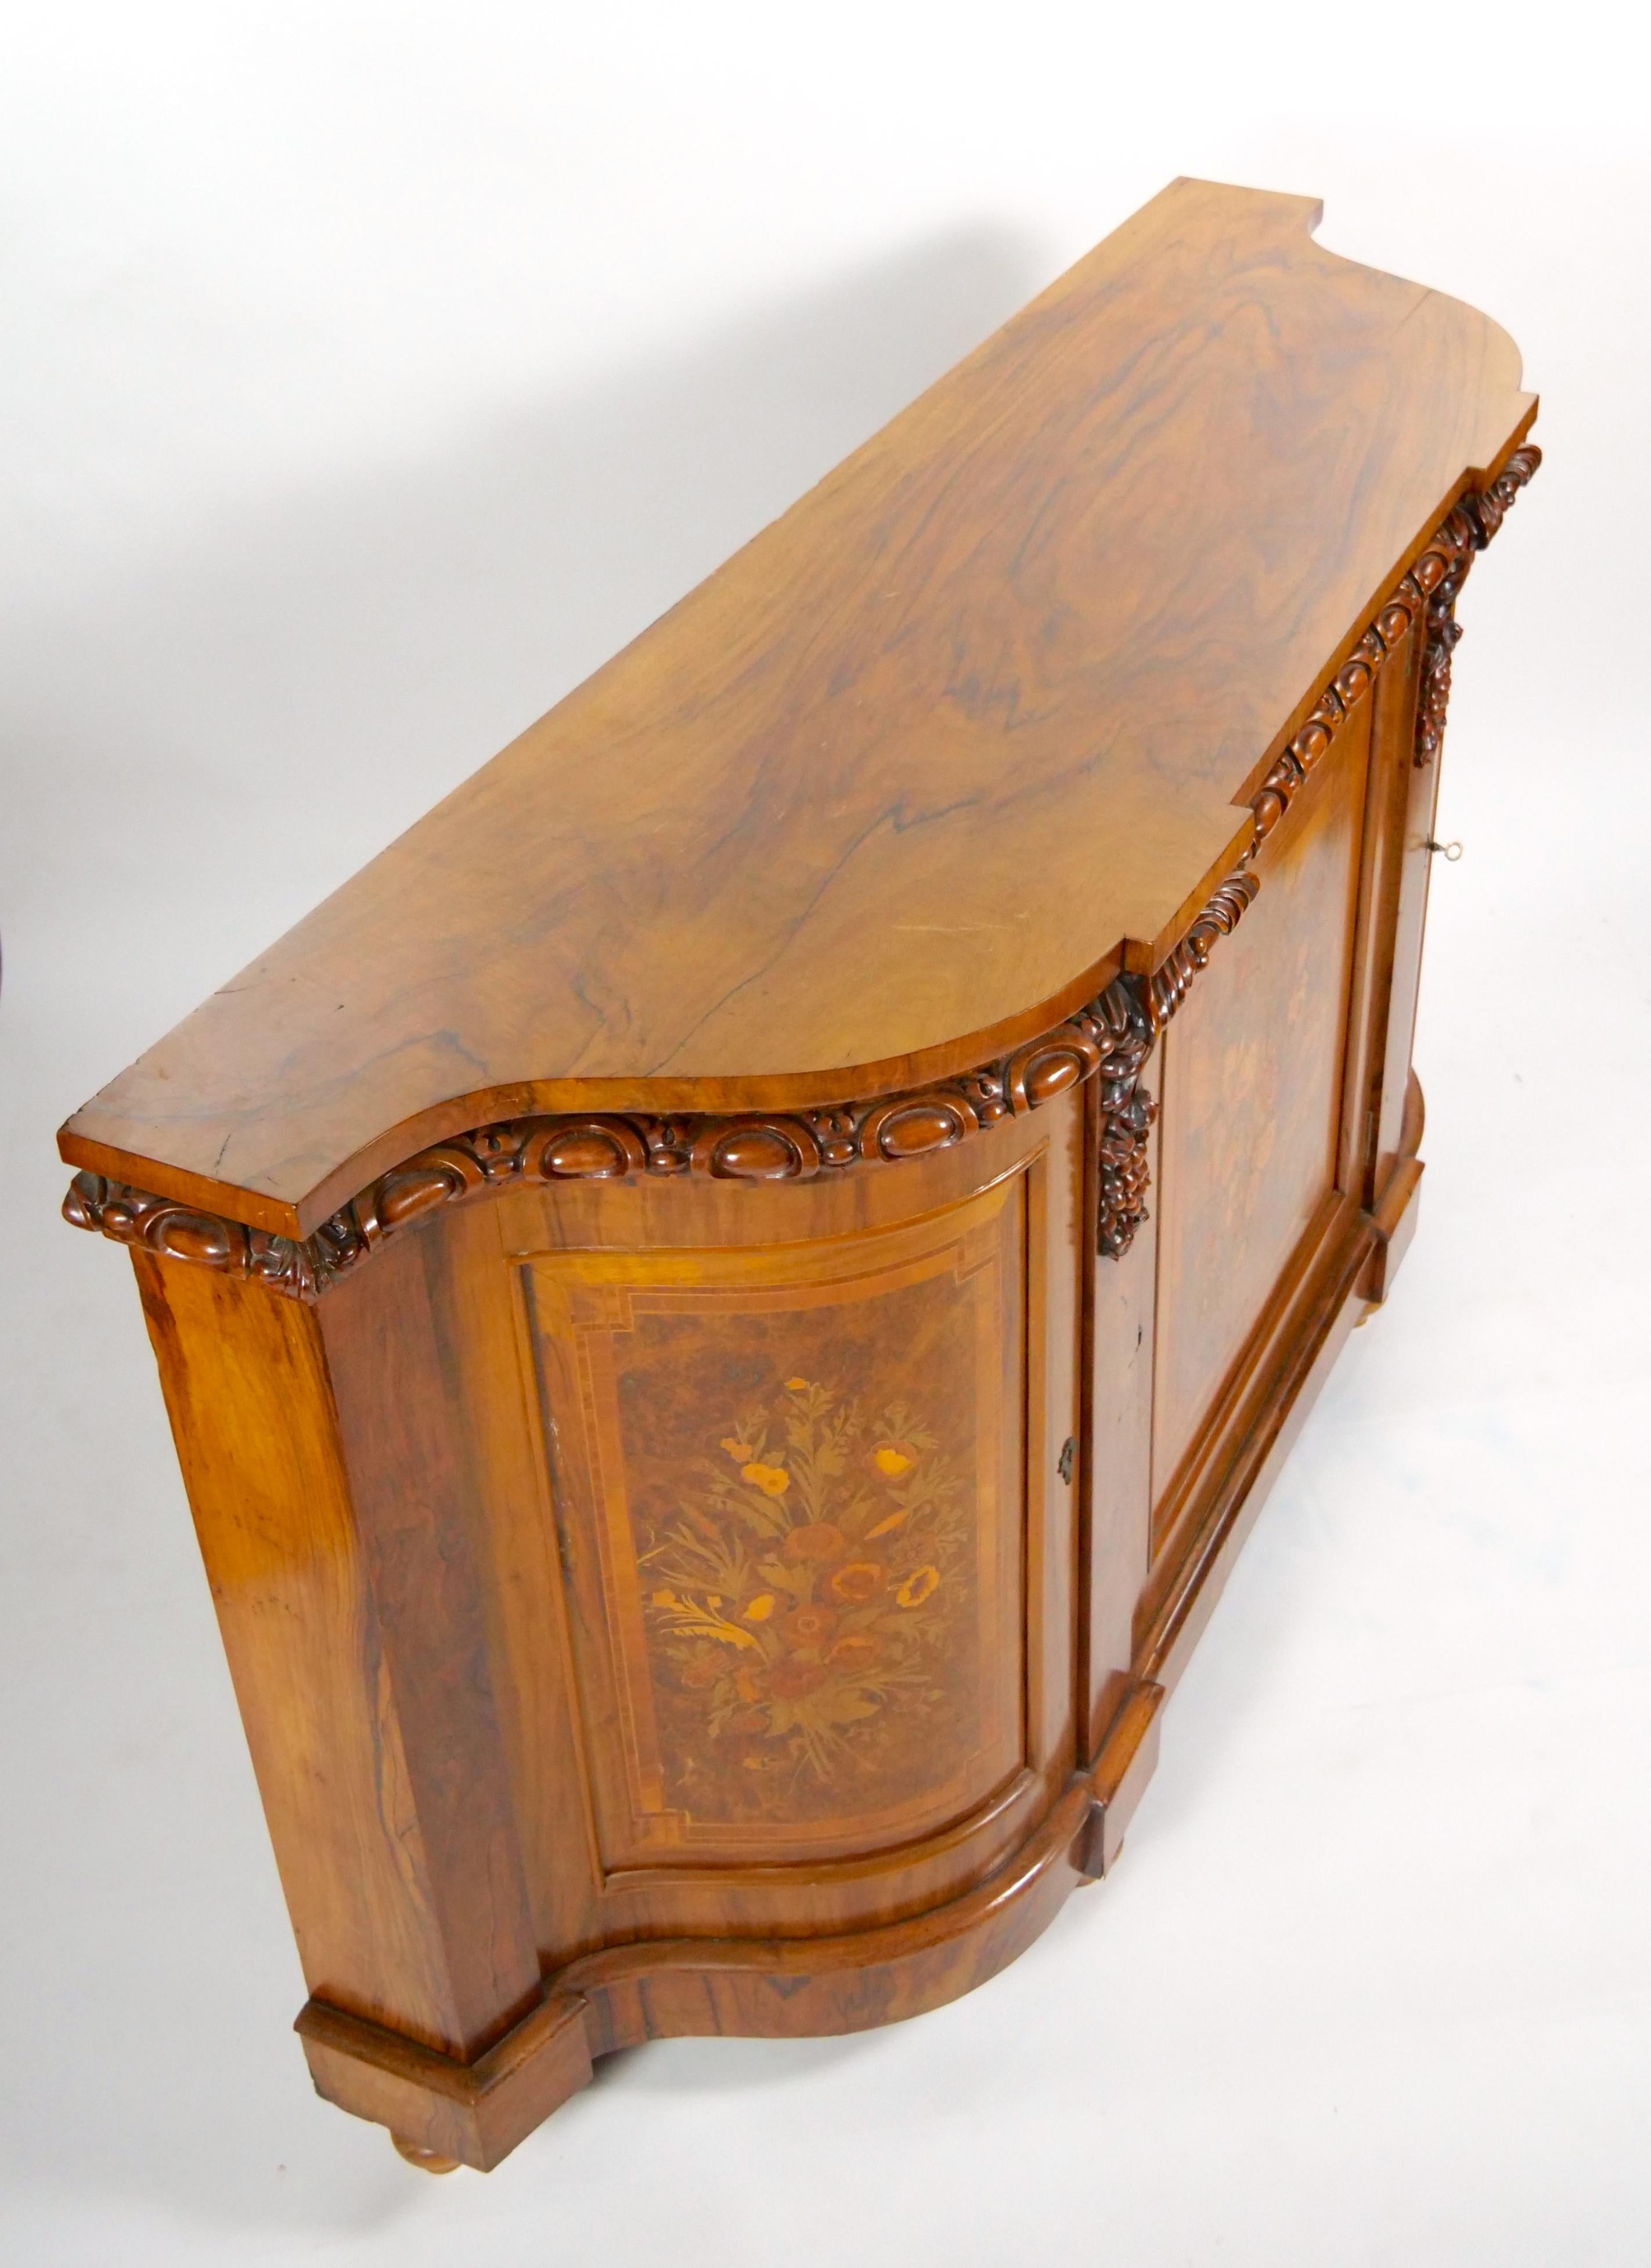 Early 19th Century English Victorian Style Walnut Marquetry Credenza / Sideboard For Sale 1